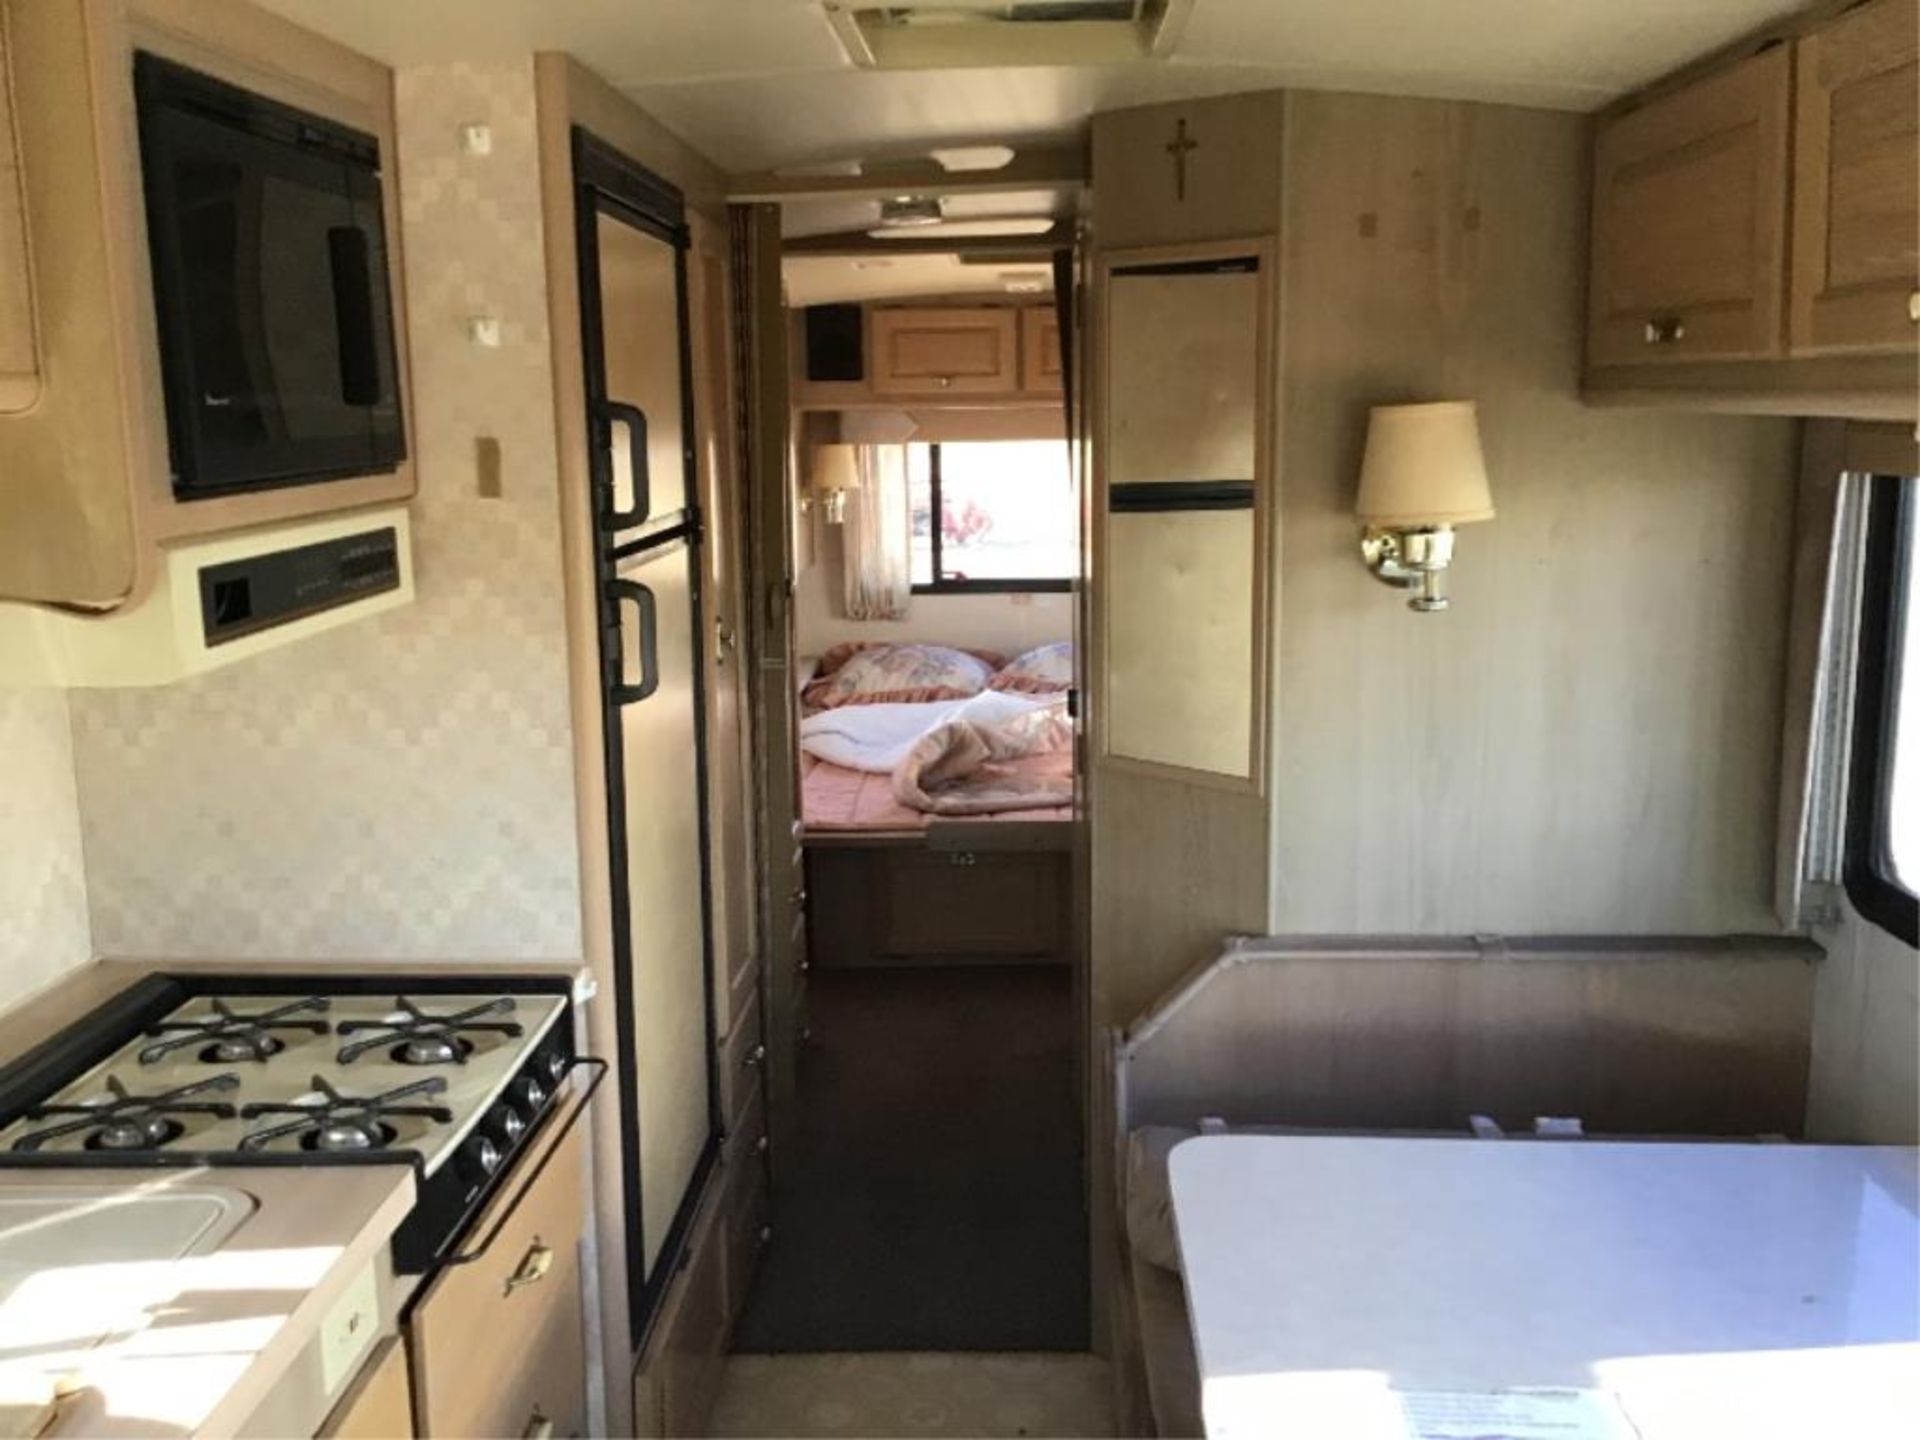 1990 Southwind Chevy 36ft Motorhome - Image 6 of 16